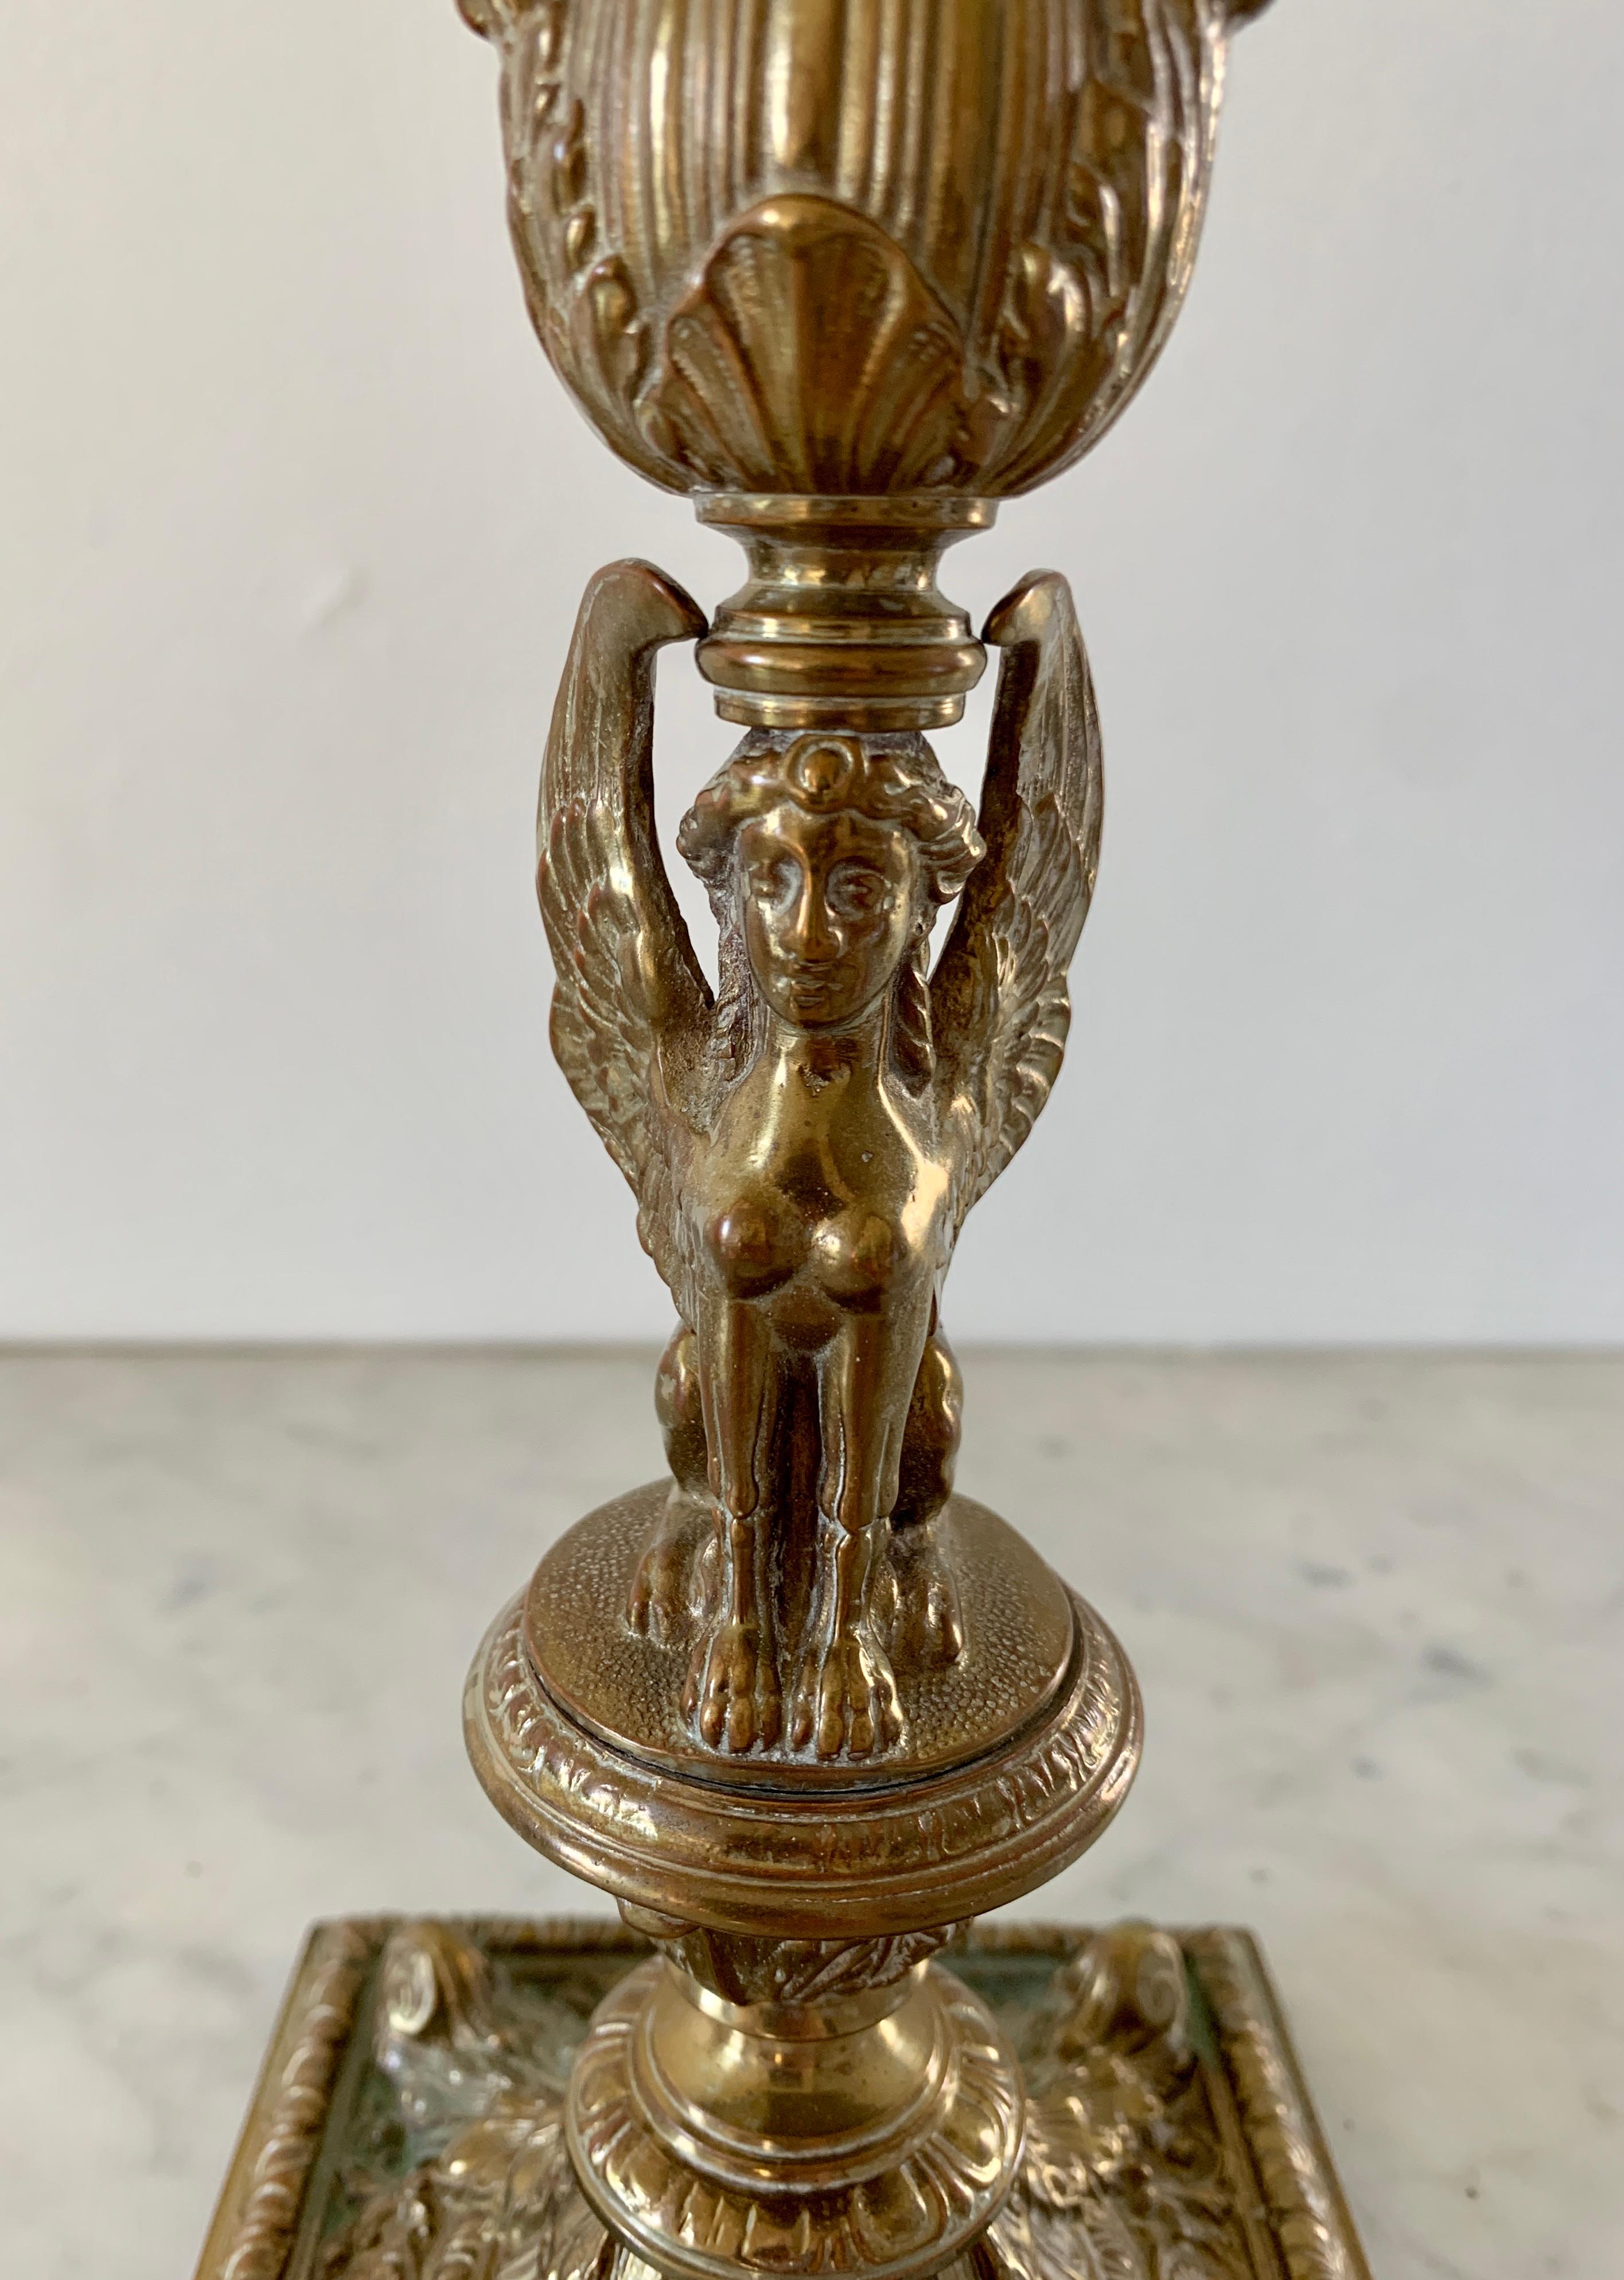 19th Century Egyptian Revival Gilt Bronze Sphinx Candlestick Holders, Pair For Sale 4